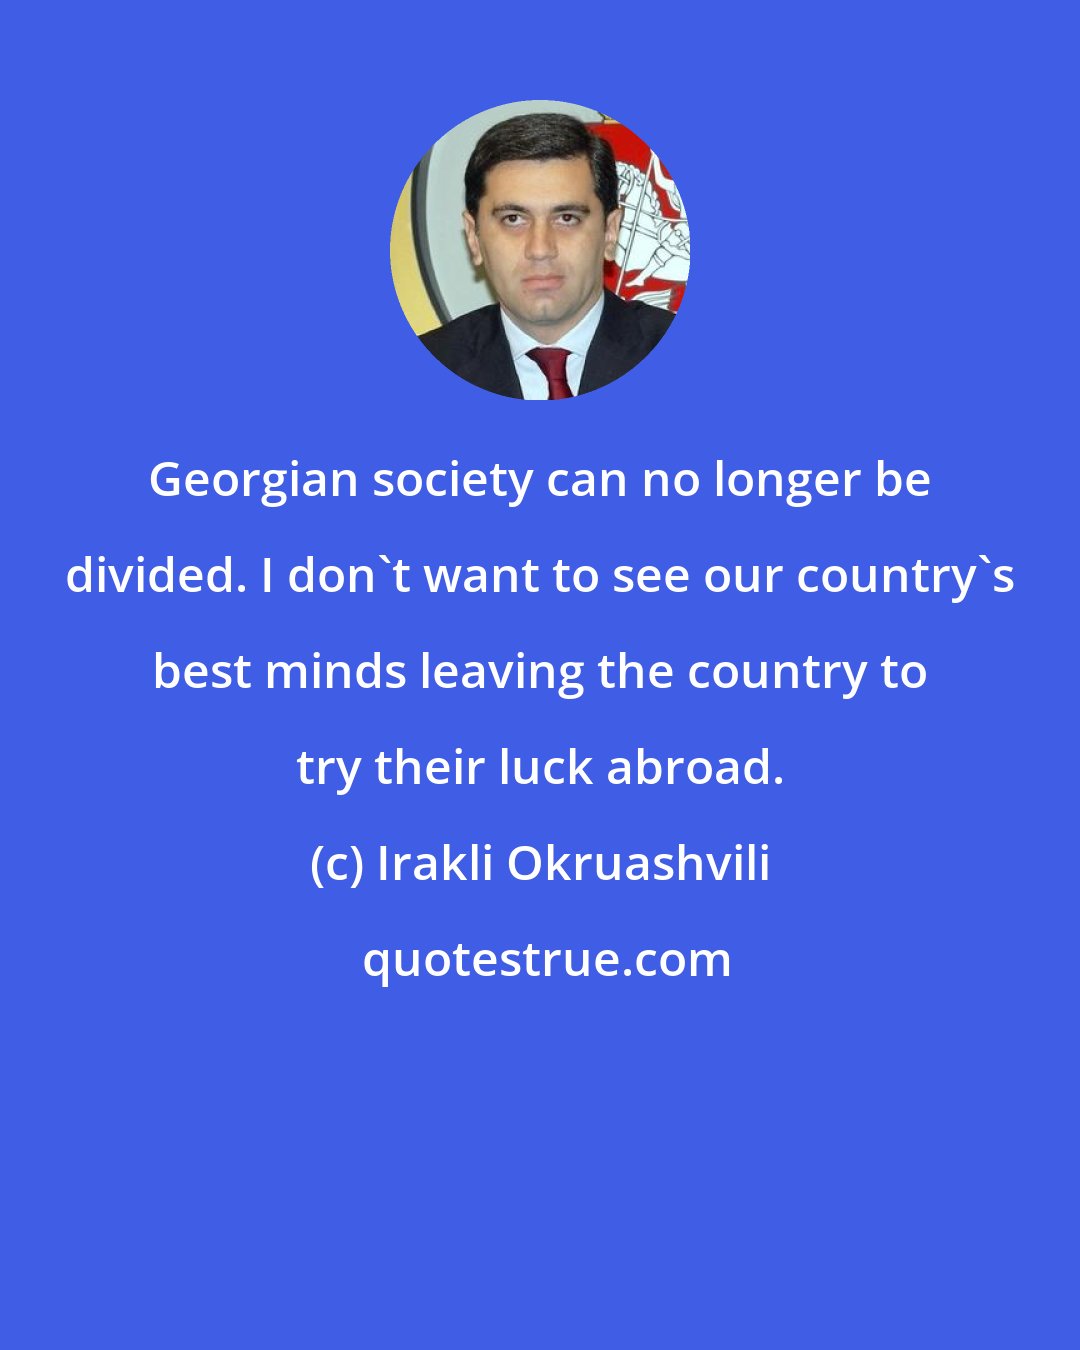 Irakli Okruashvili: Georgian society can no longer be divided. I don't want to see our country's best minds leaving the country to try their luck abroad.